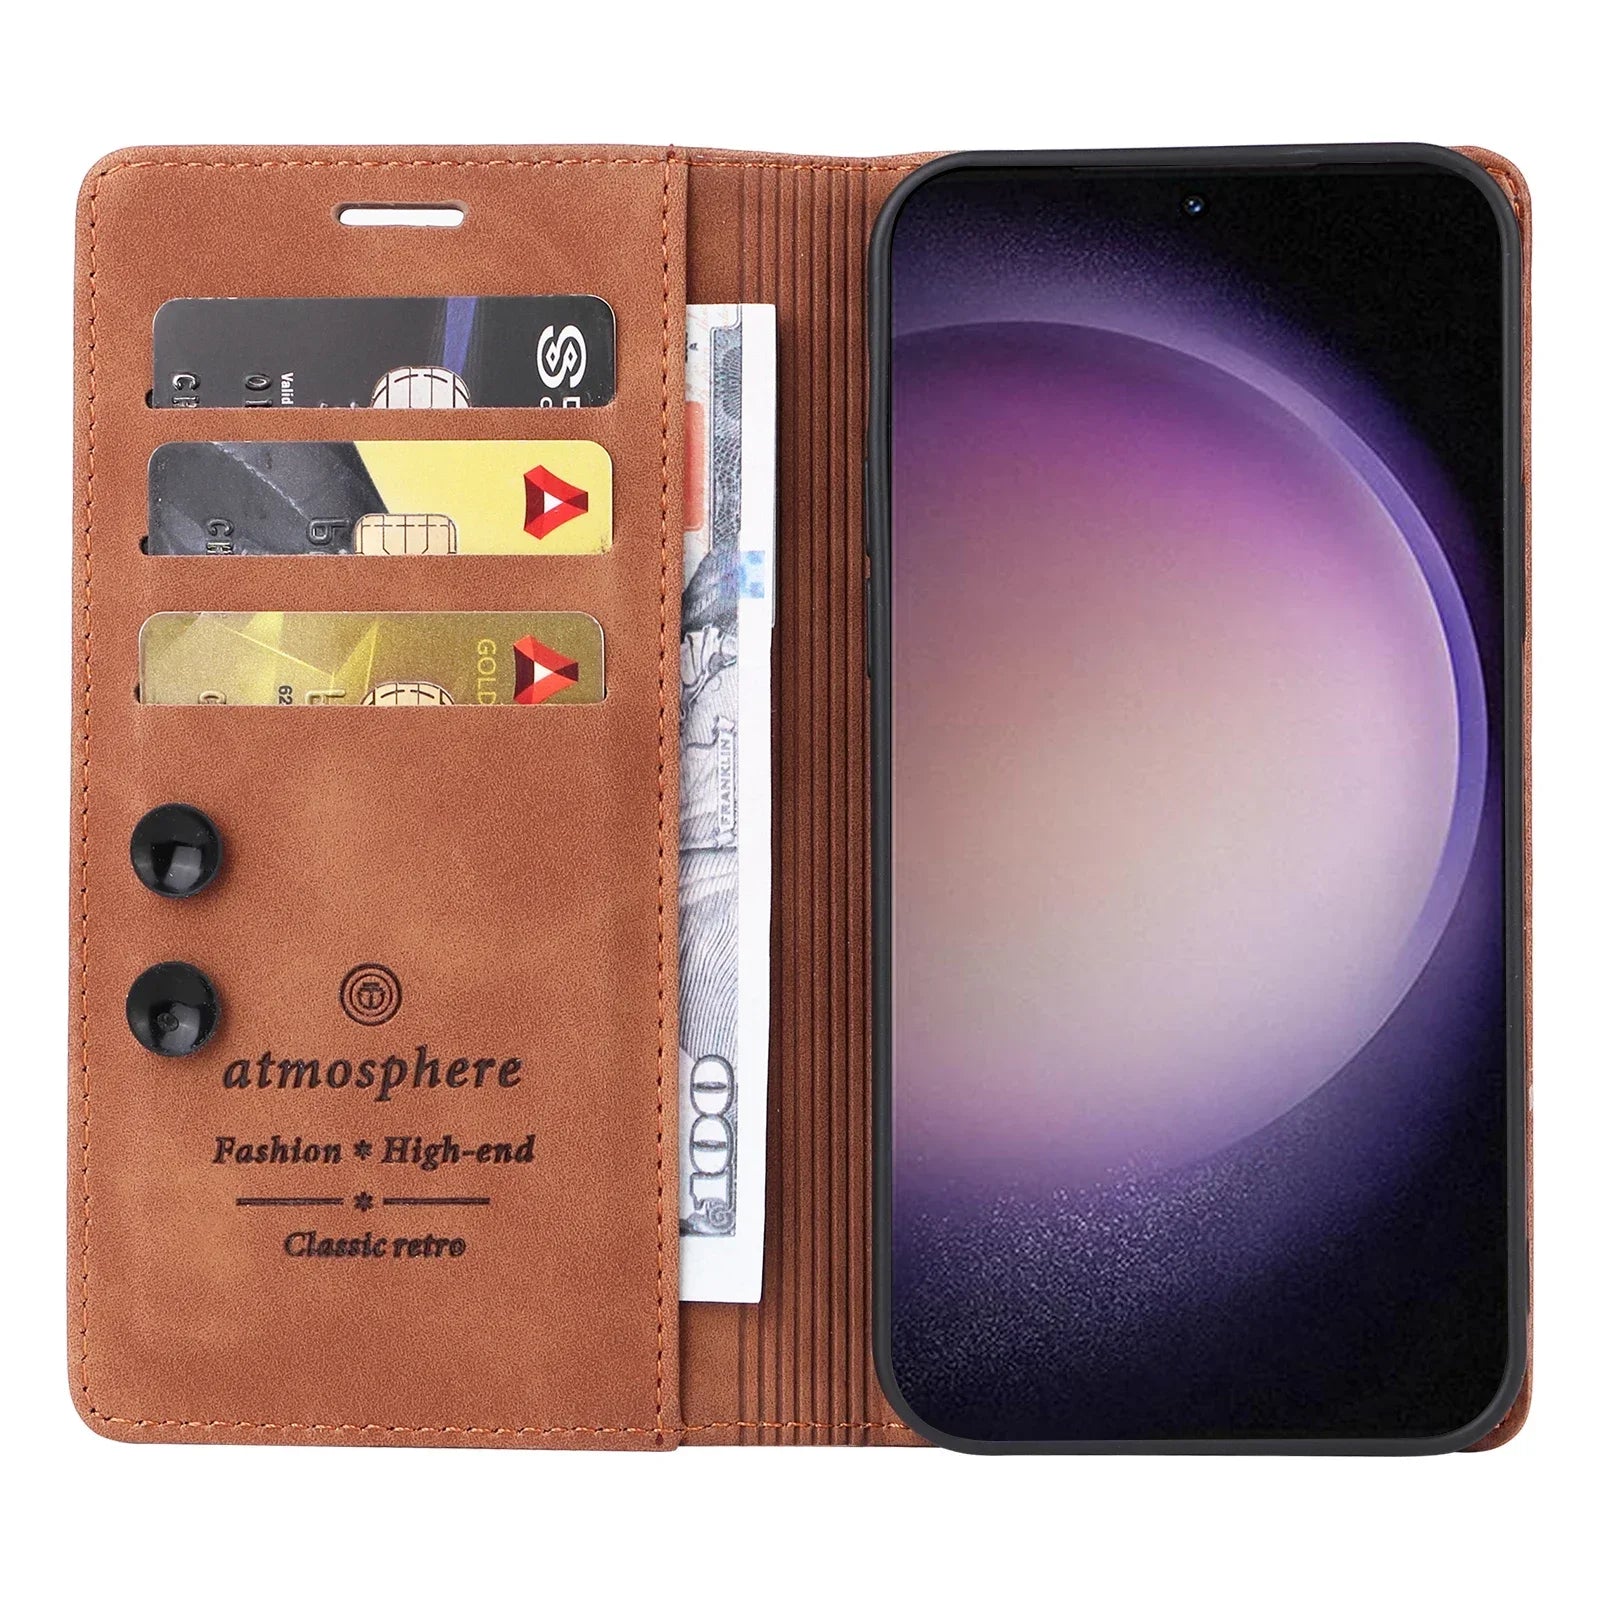 Wallet Ultra thin Leather Flip Galaxy Note and S Case - DealJustDeal